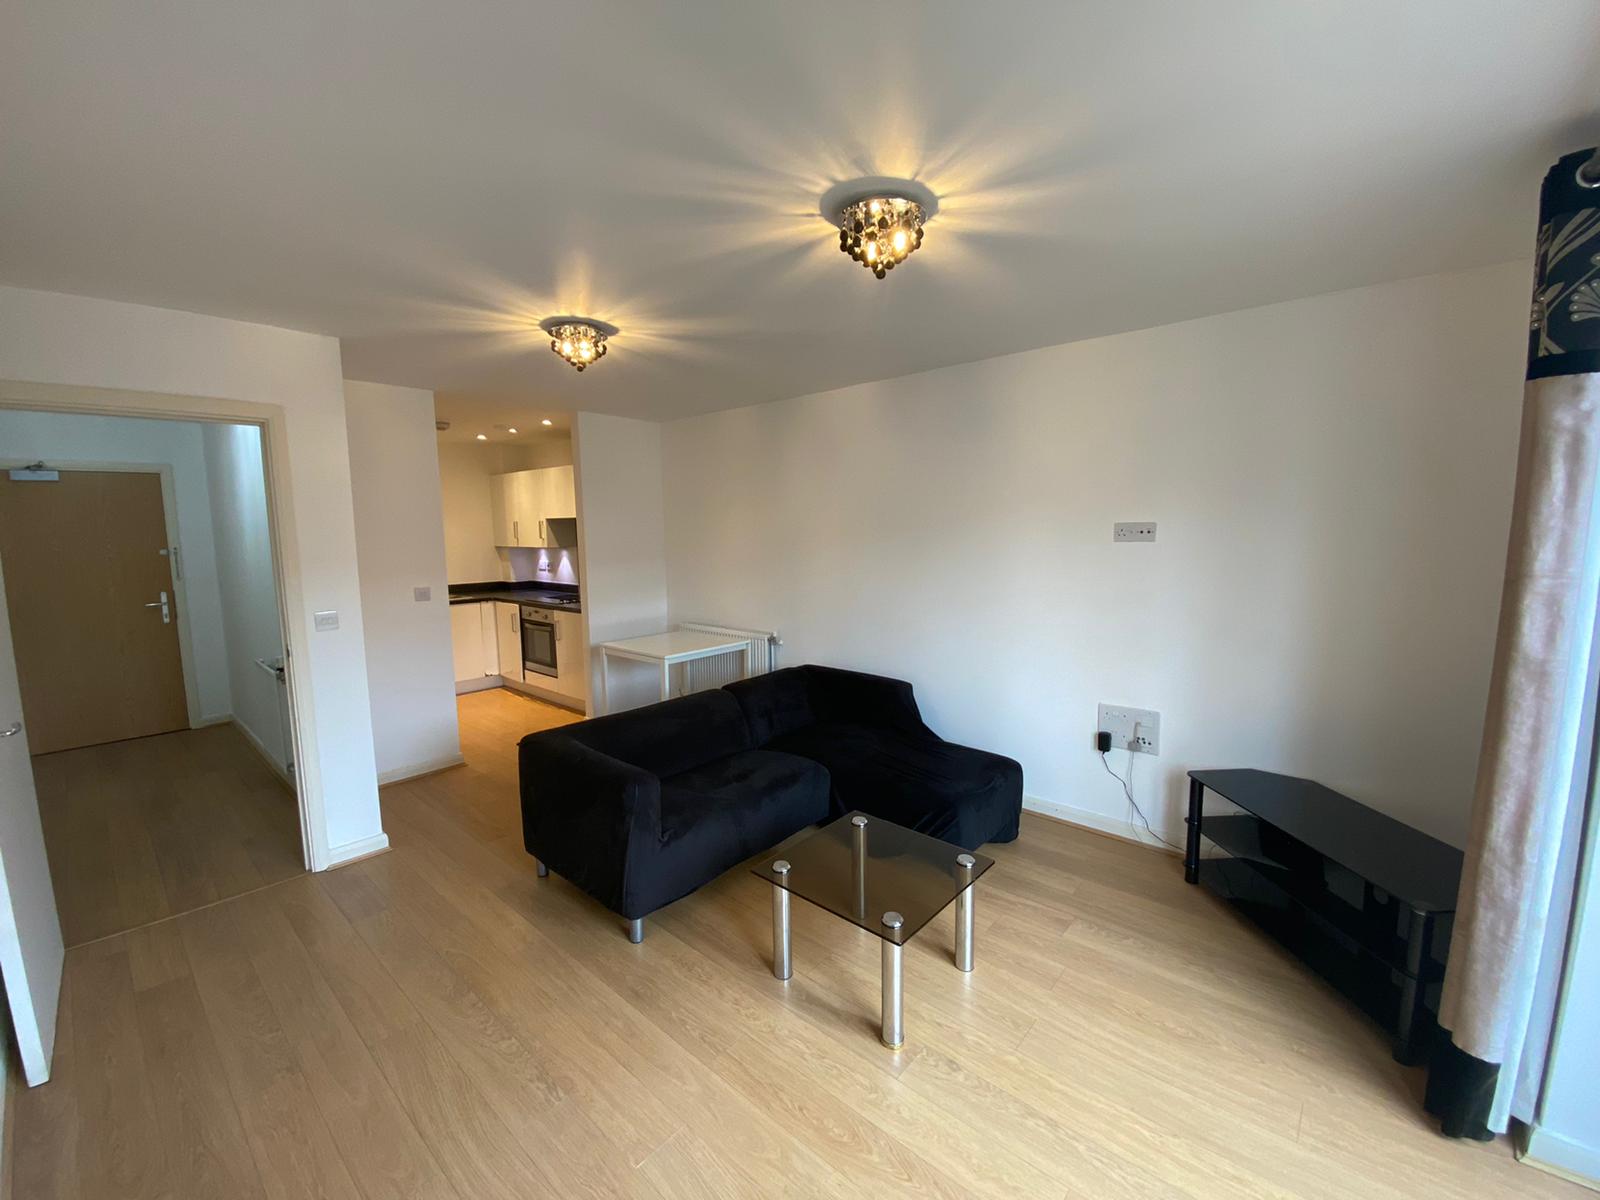 1 bedroom flat at Featherstone Court, Southall, UB2 5GQ